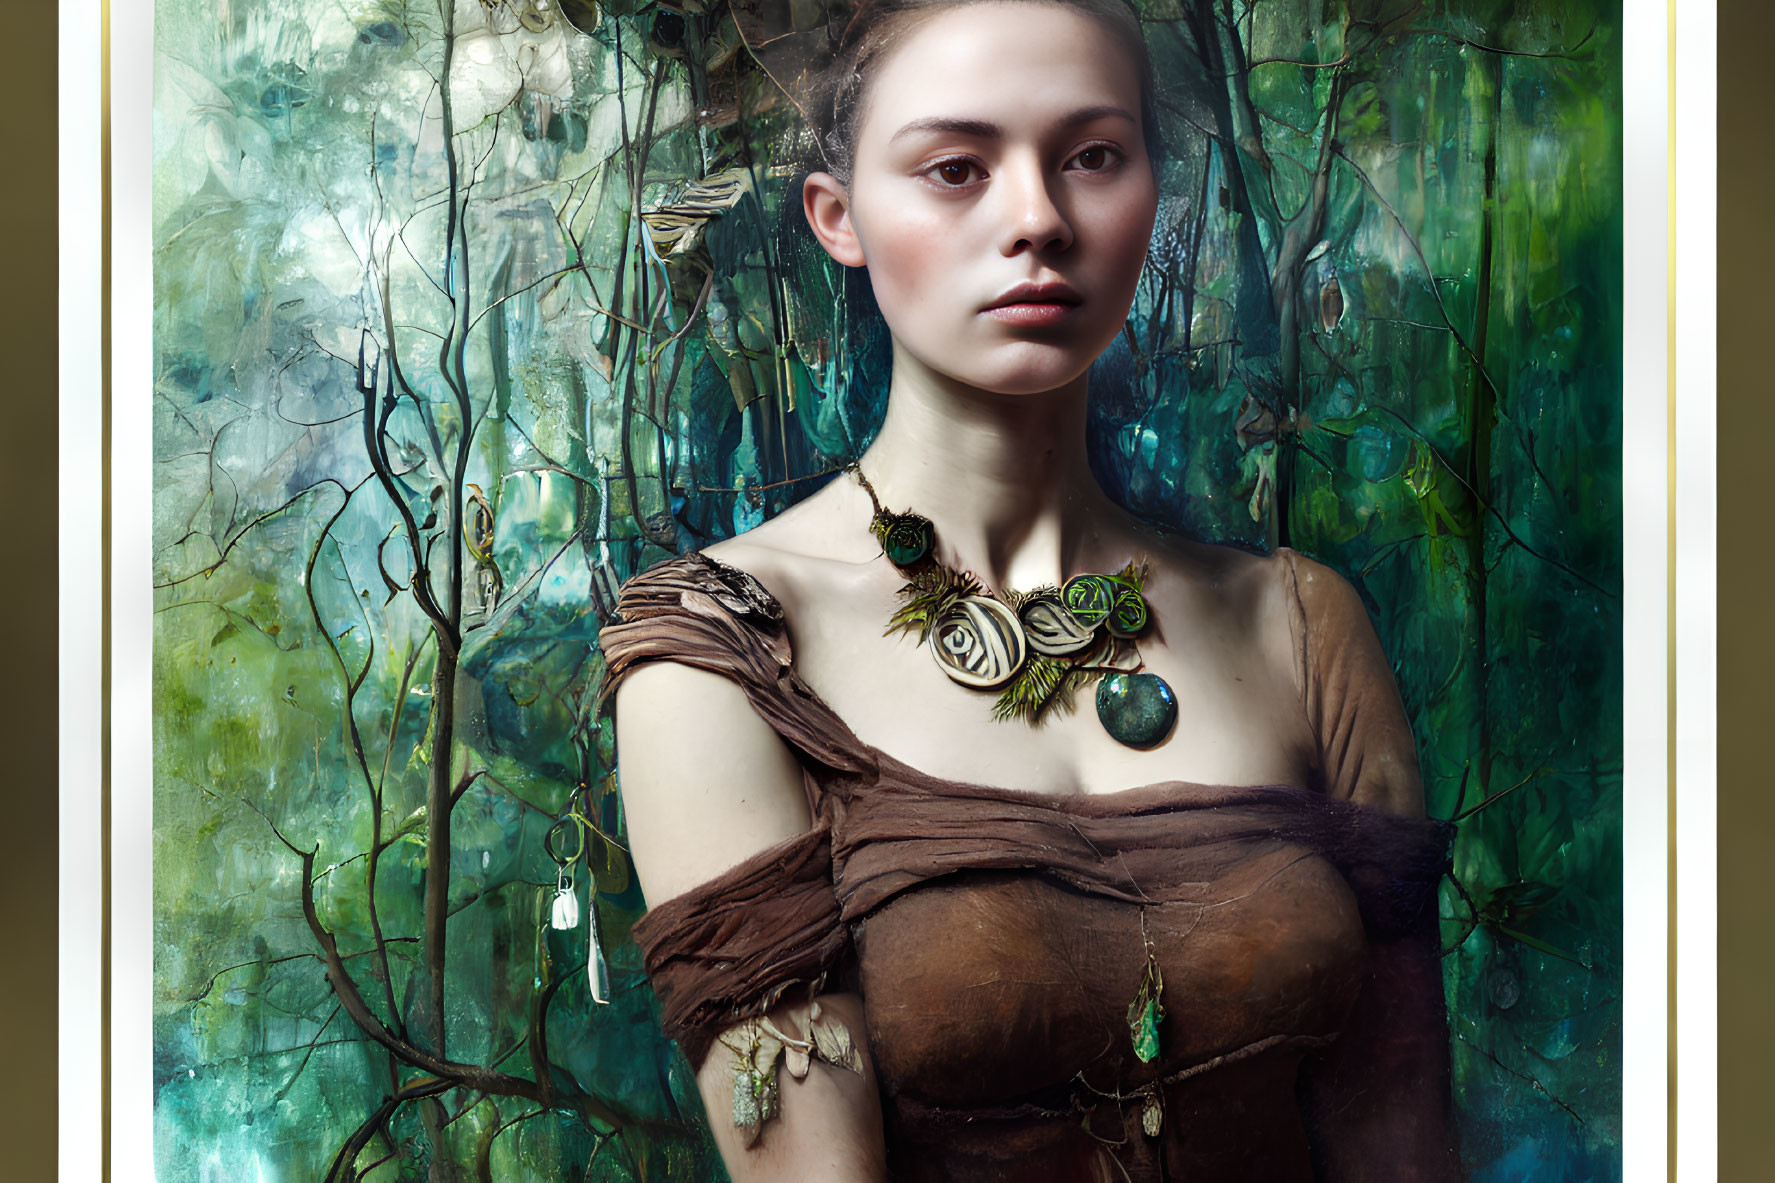 Ethereal woman in brown dress with leafy jewelry against abstract green backdrop